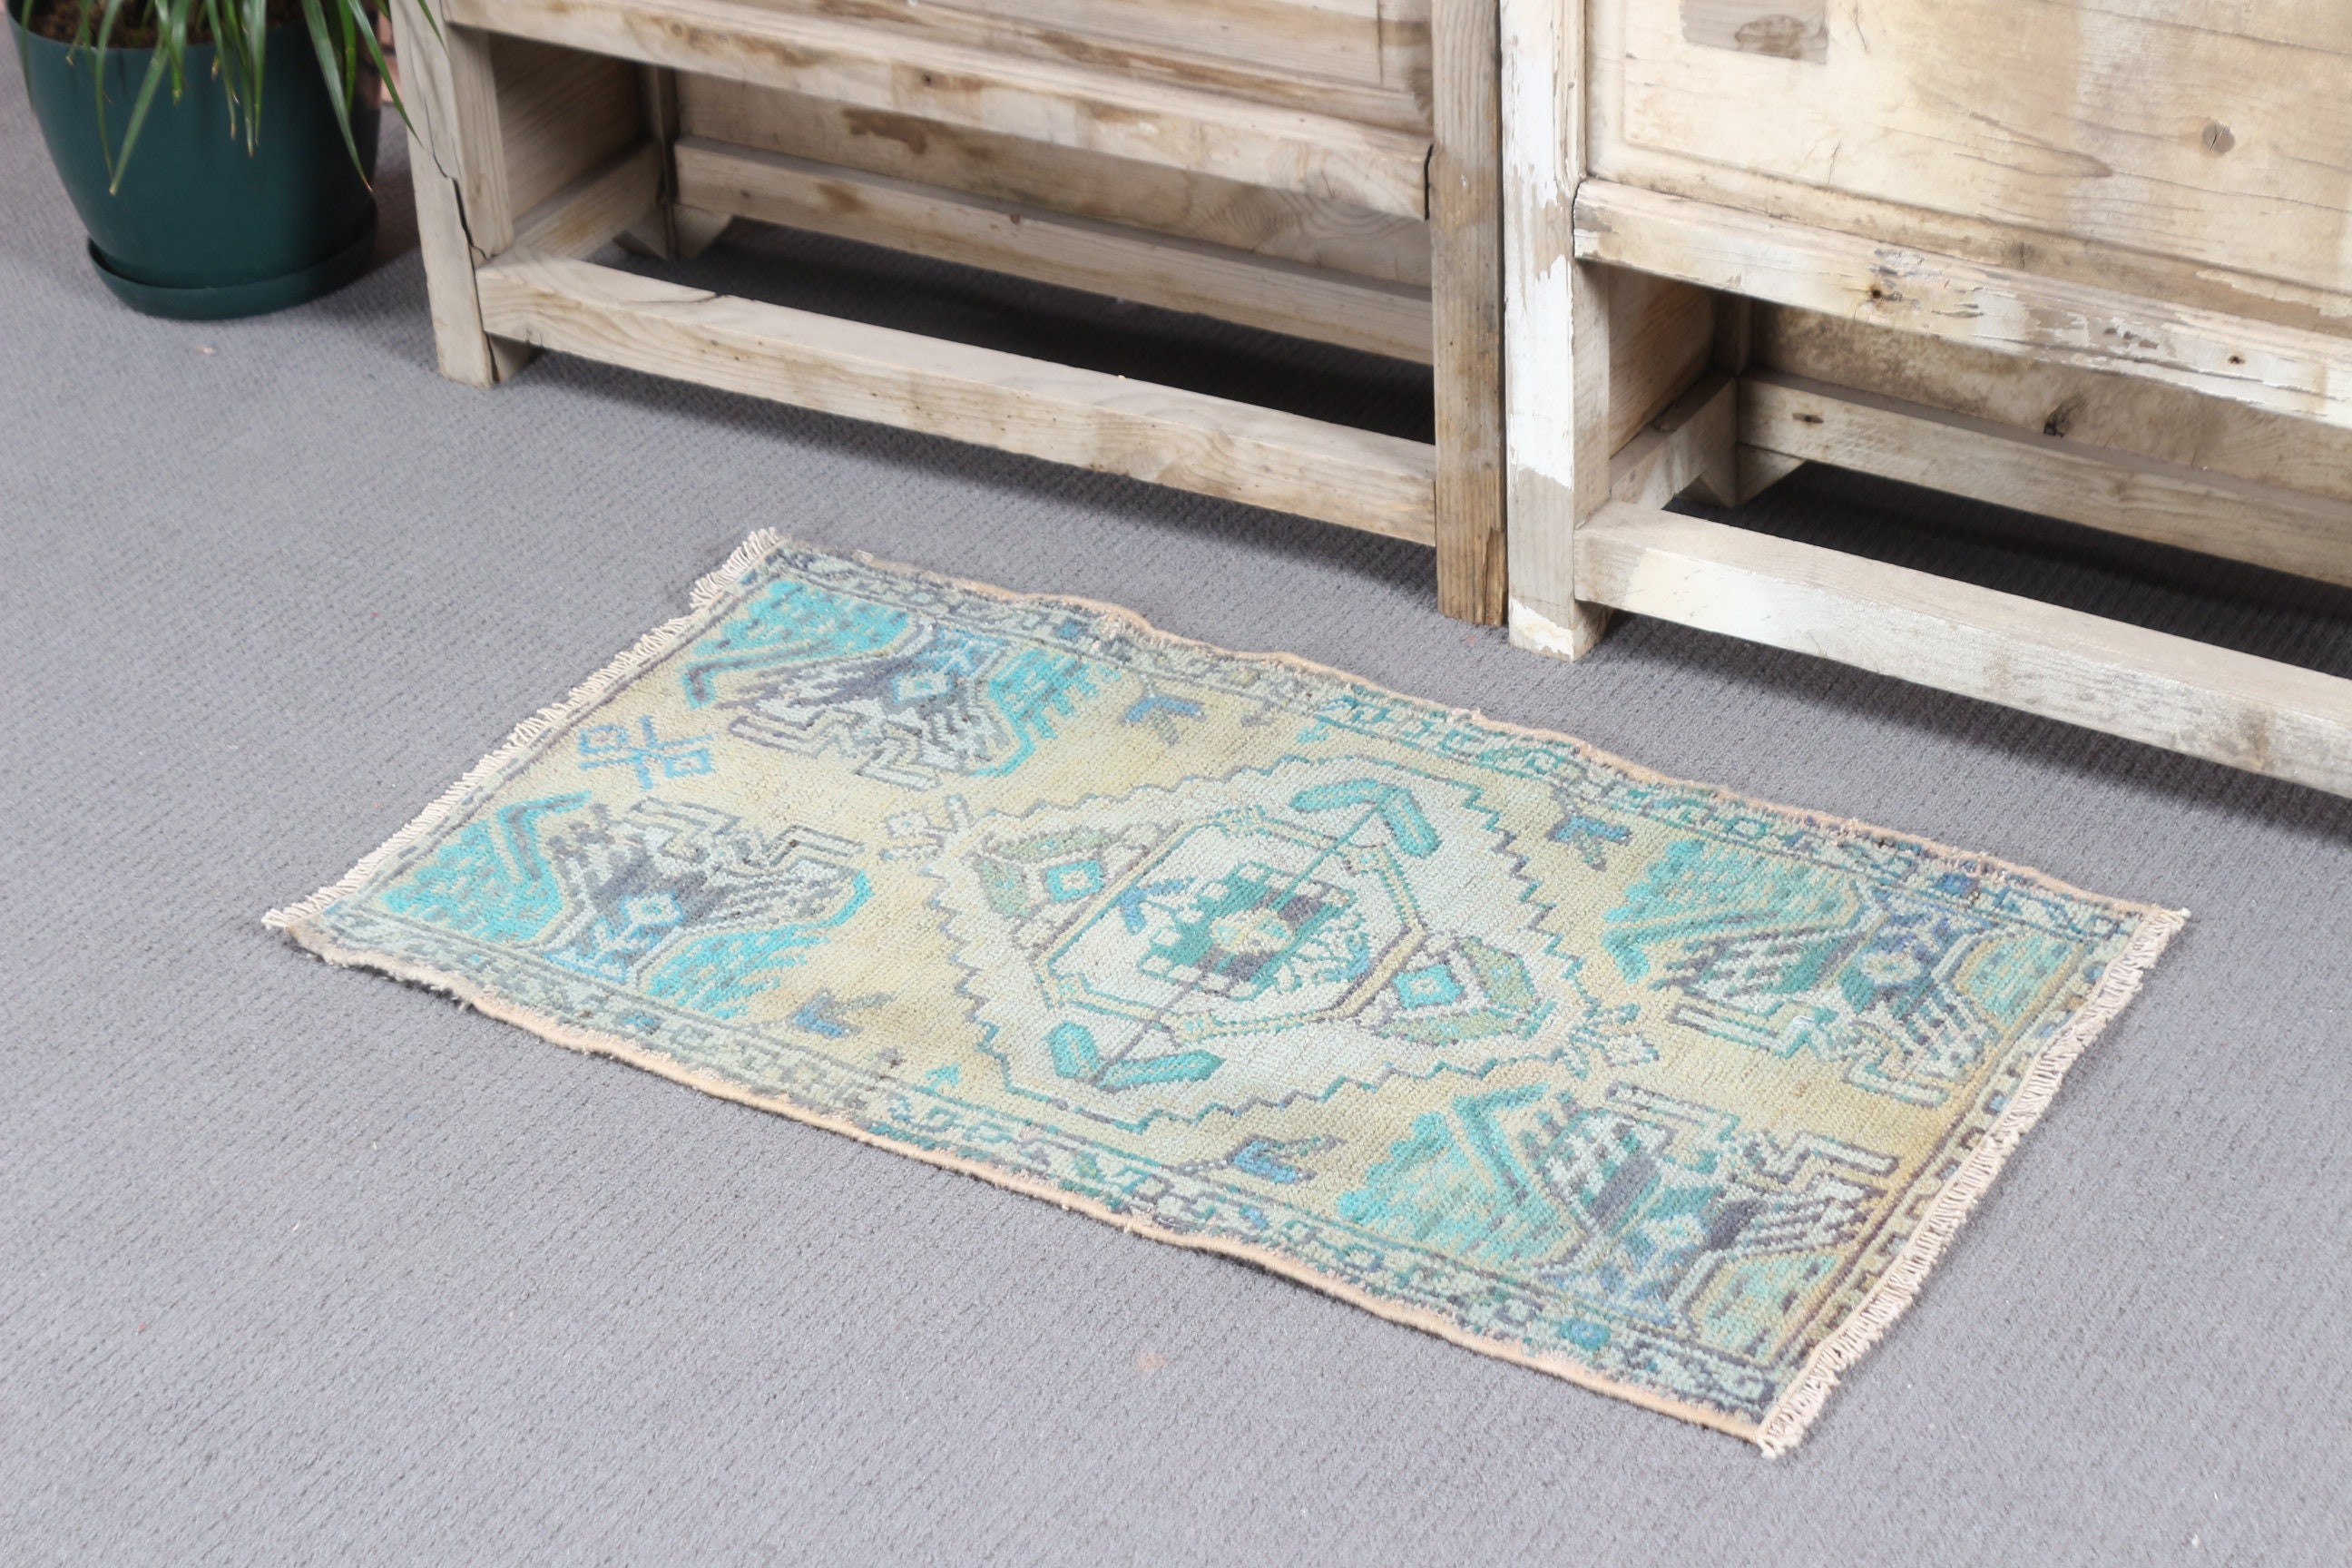 Oushak Rug, Vintage Rugs, Blue Bedroom Rugs, Turkish Rugs, Wall Hanging Rugs, 1.6x2.9 ft Small Rugs, Cute Rug, Rugs for Kitchen, Cool Rugs